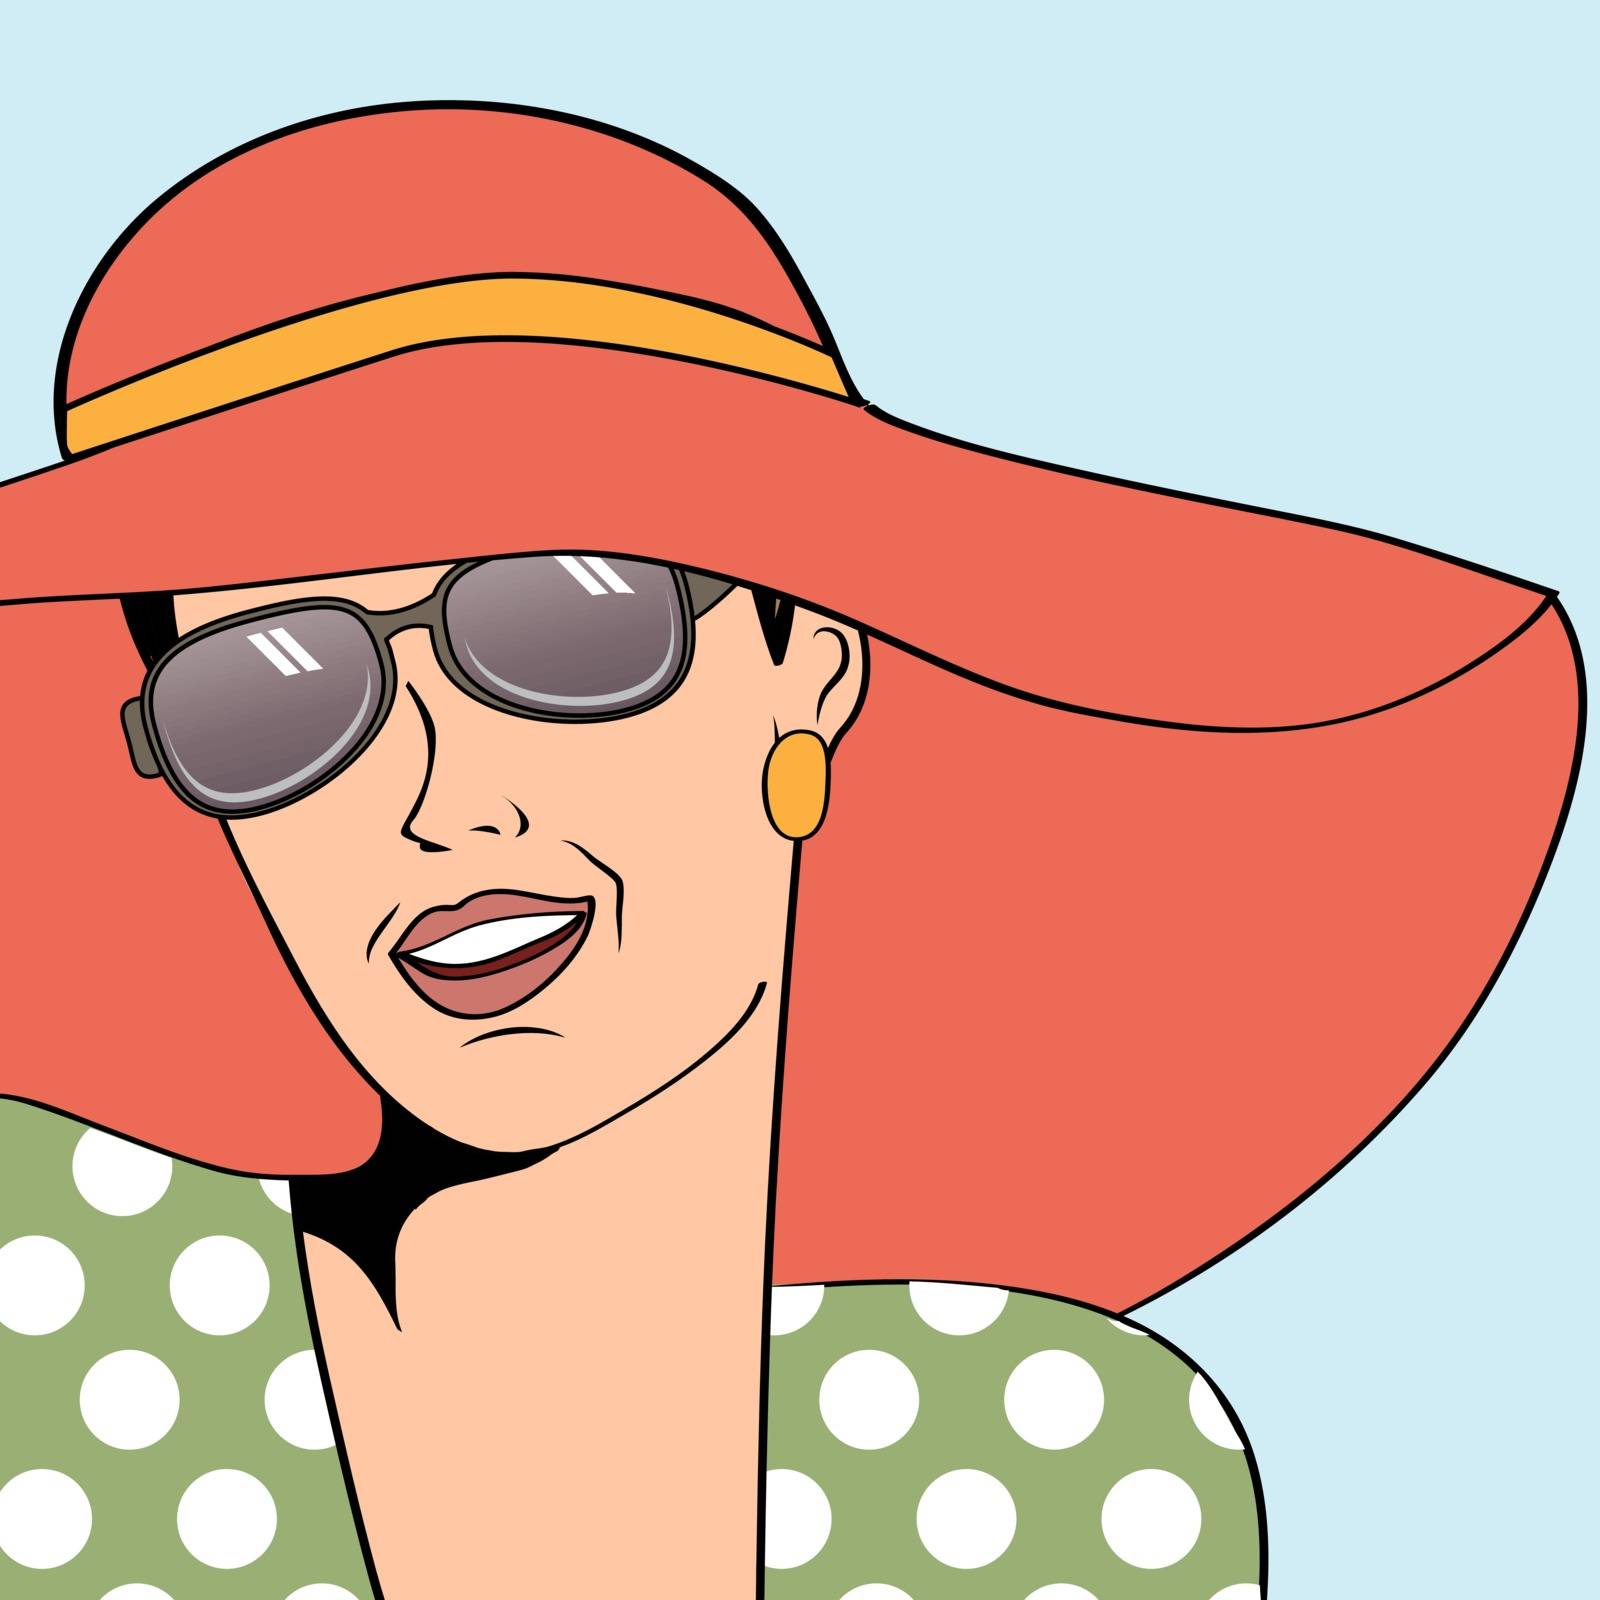 popart retro woman with sun hat in comics style, summer illustra by balasoiu